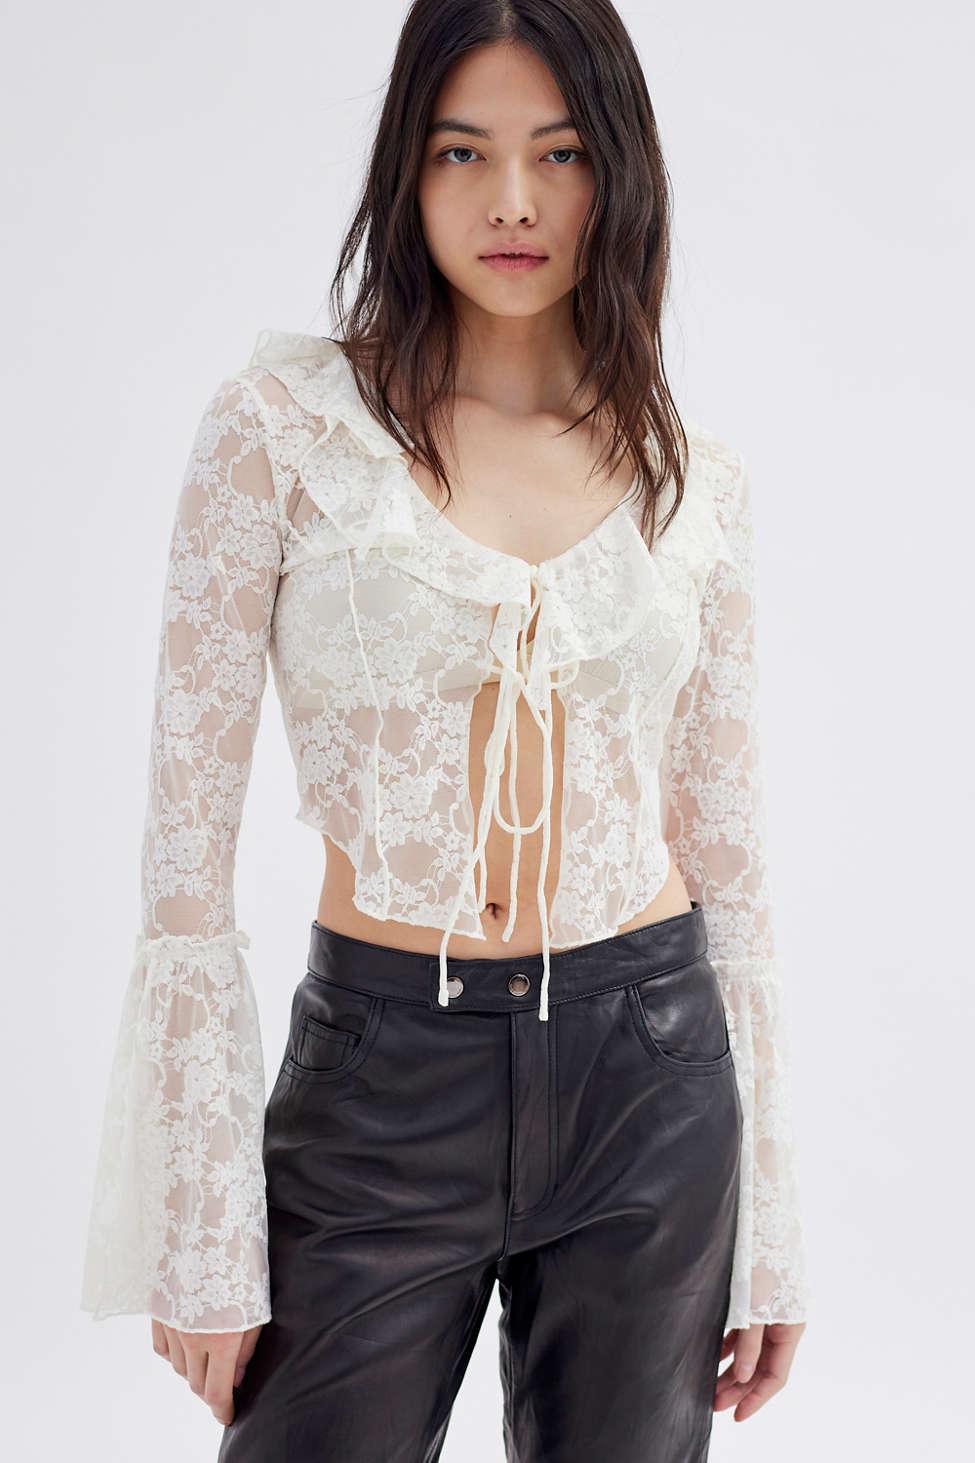 Urban Outfitters Uo Gossamer Sheer Lace Flyaway Top in White